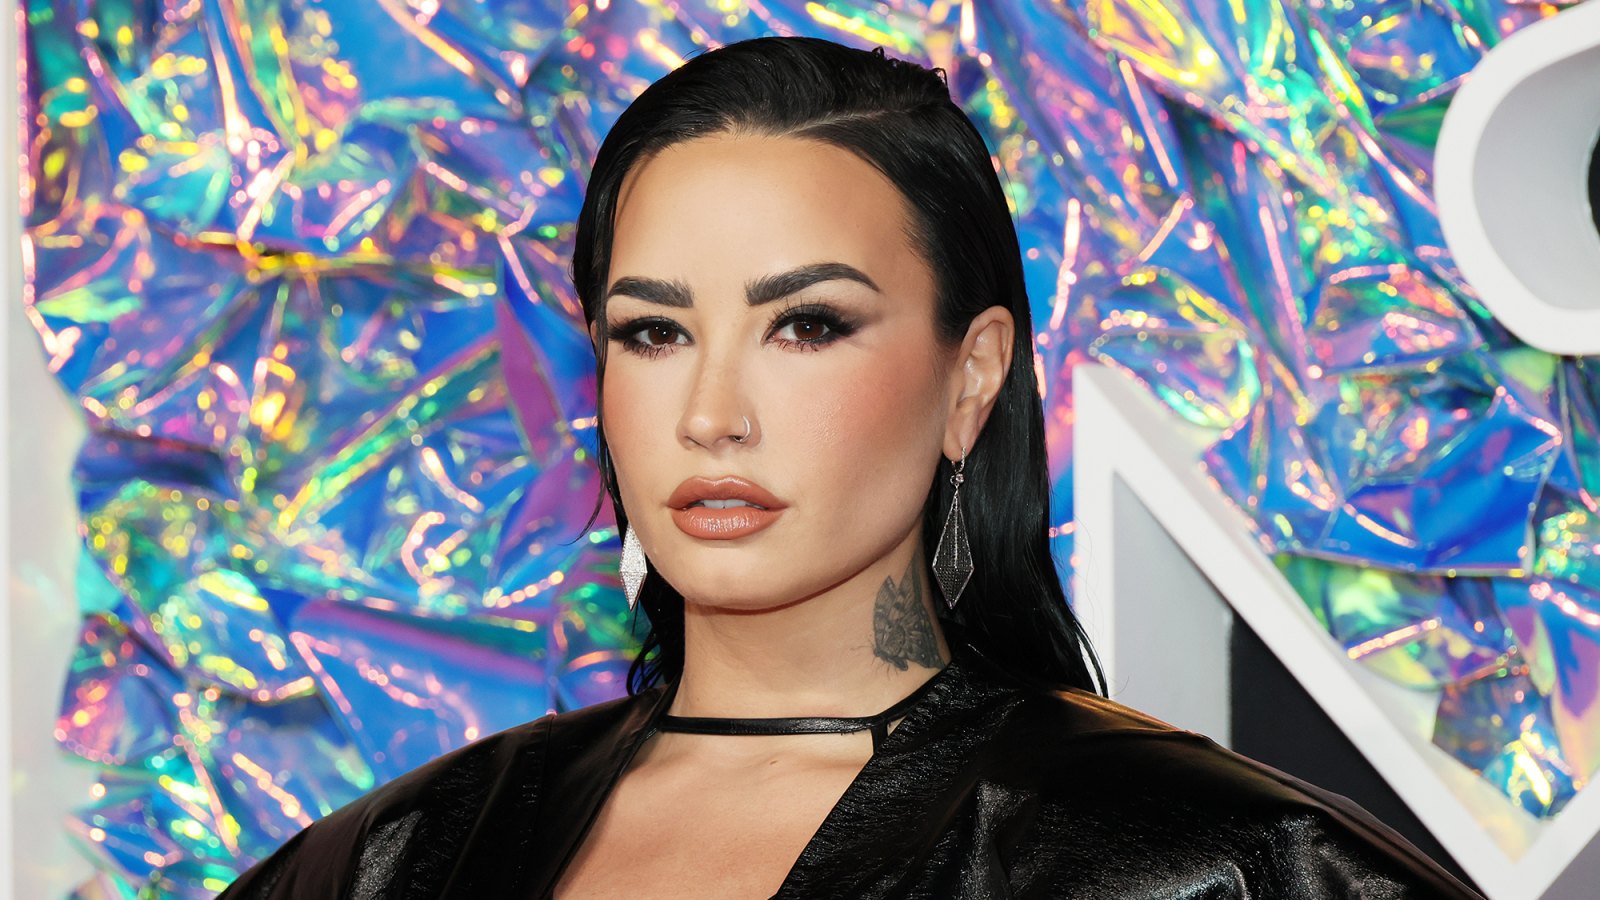 Demi Lovato Wrote ‘Cool for the Summer’ About Her Secret Romance With Another Famous Woman